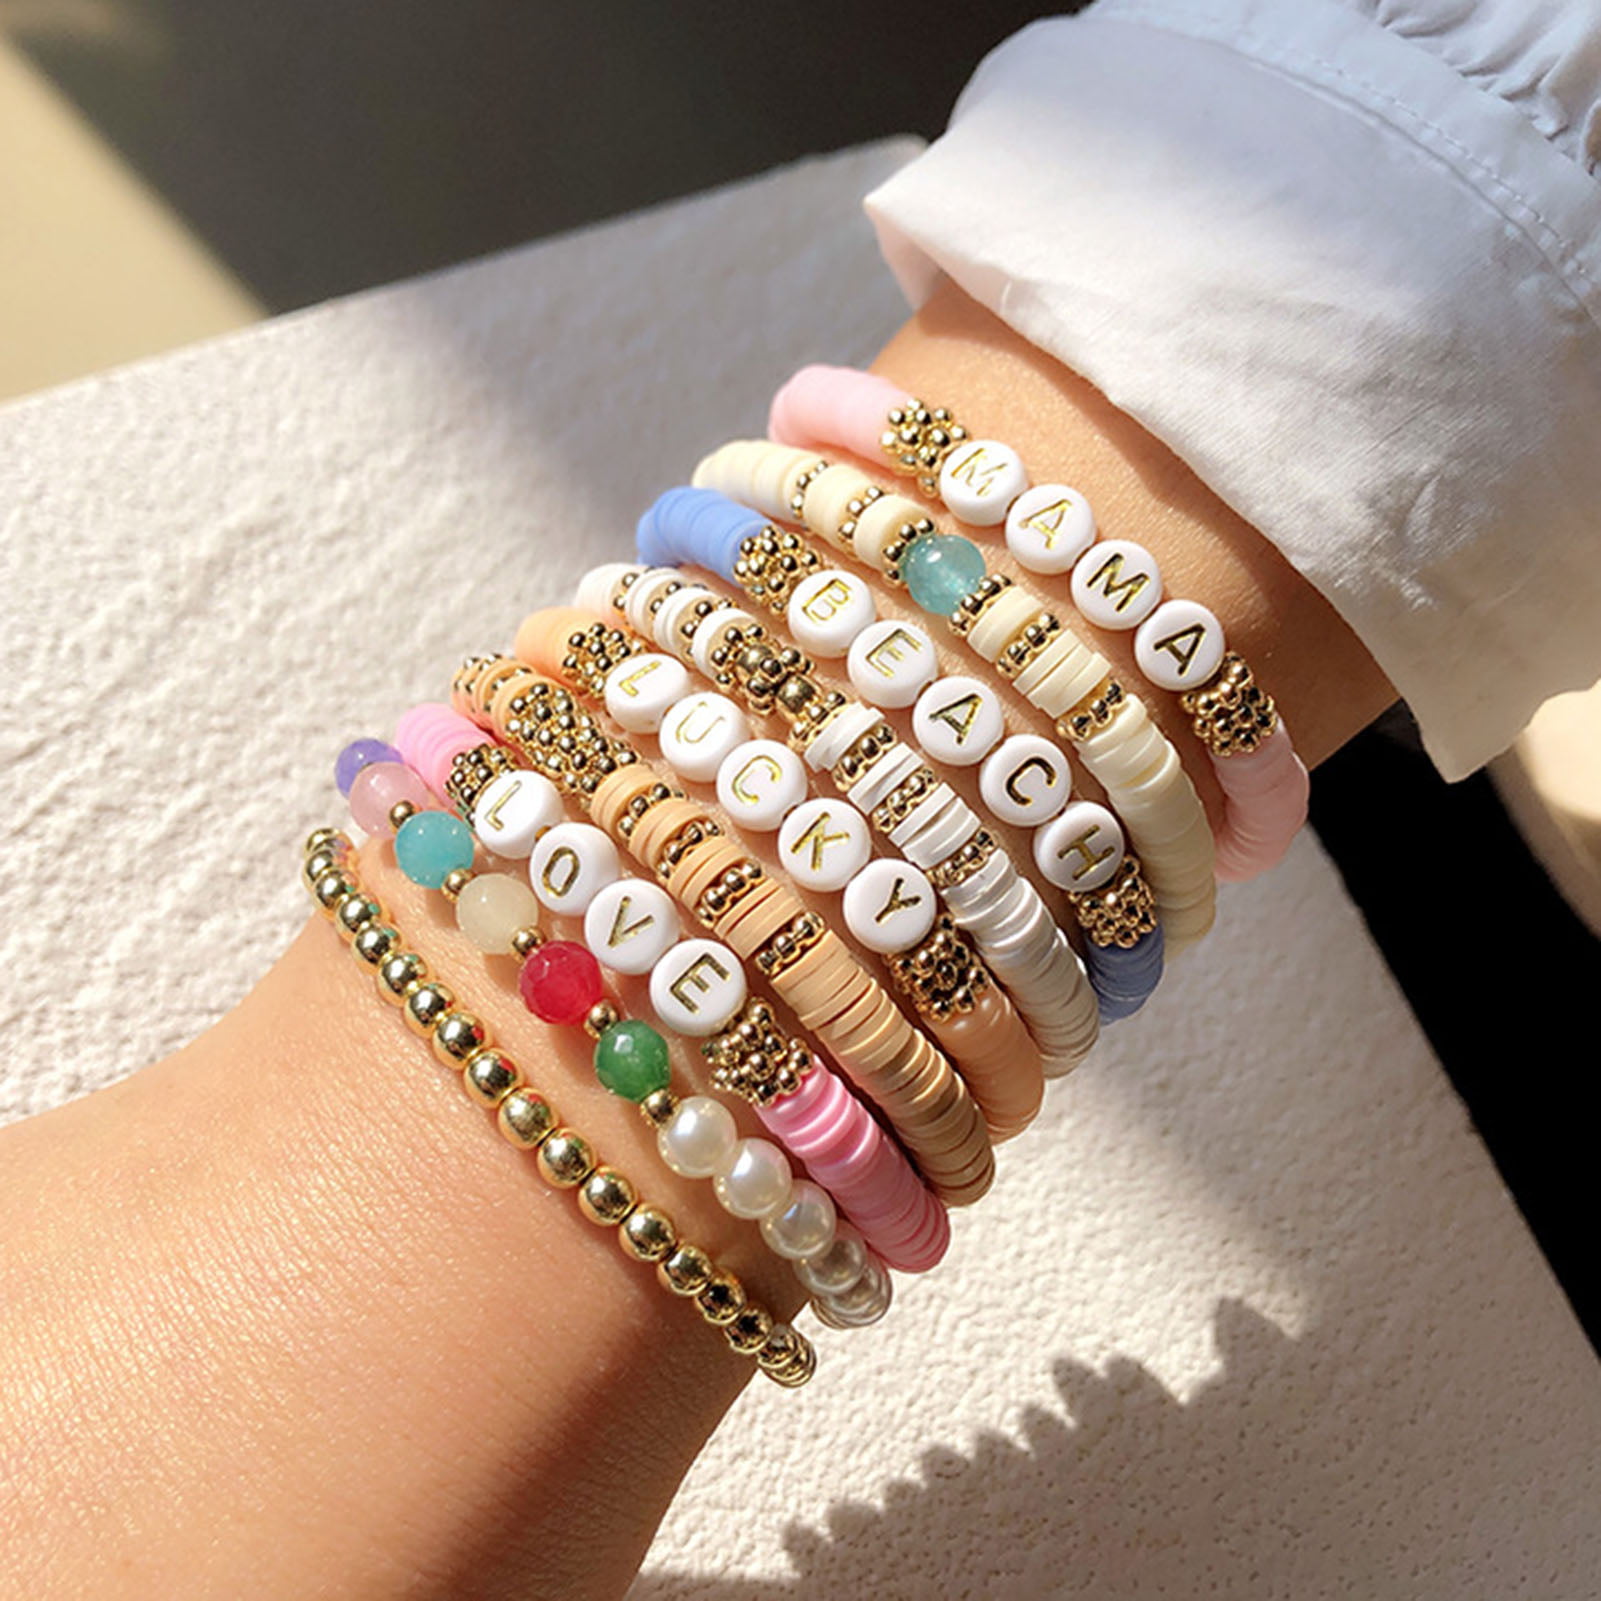 5Pcs/Set Lover Elastic Bracelet Letter Print Polymer Clay Beads Bracelet  Summer Beach Bohemian Layering – the best products in the Joom Geek online  store